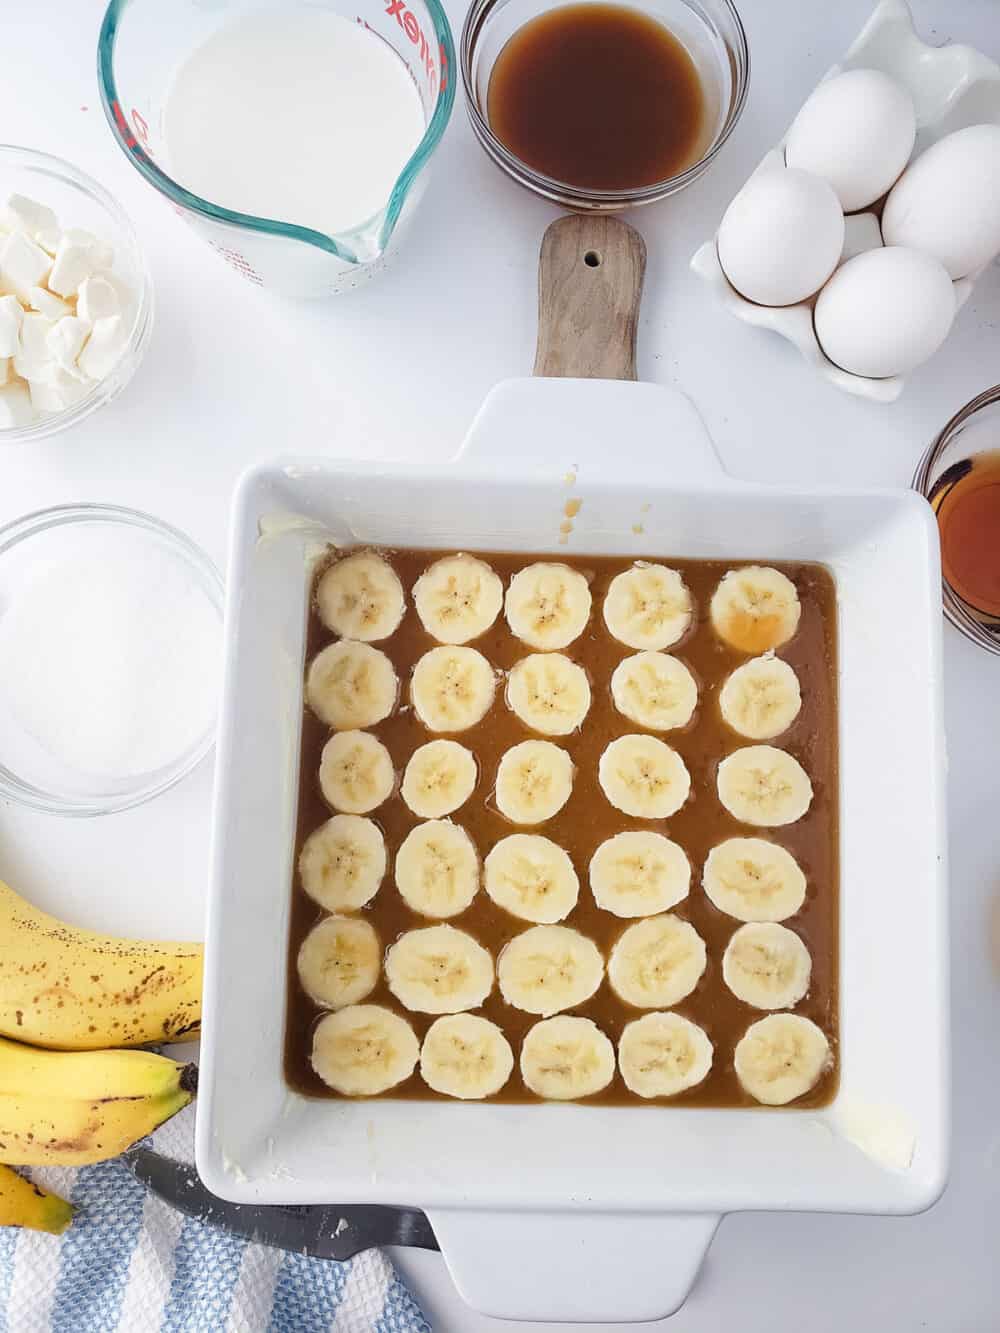 Adding caramel and a layer of sliced banana to a white casserole dish